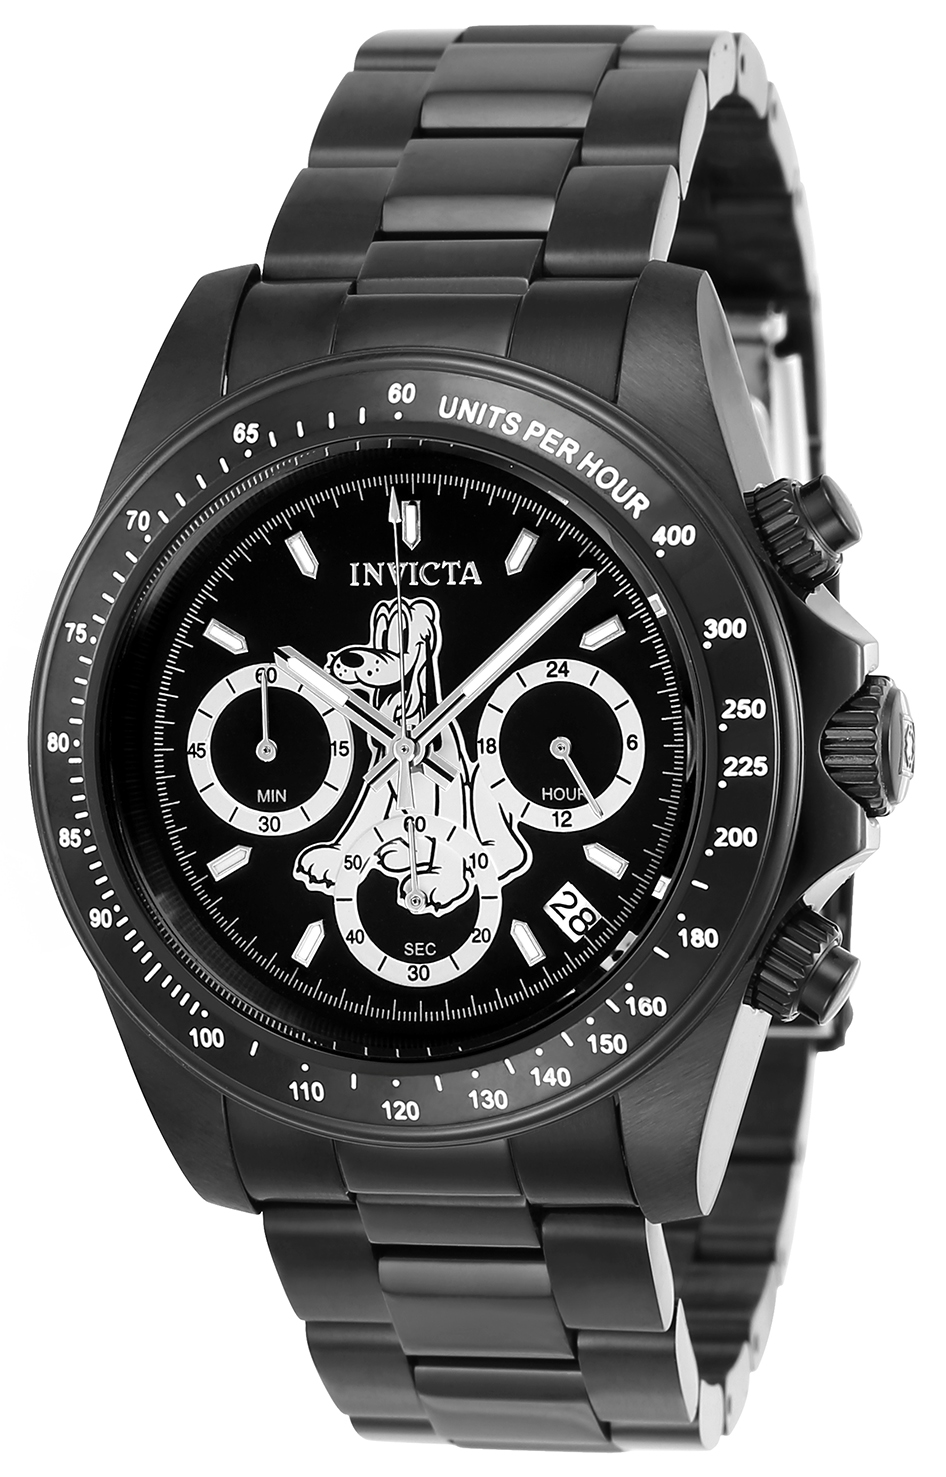 #1 LIMITED EDITION - Invicta Disney Limited Edition Pluto Quartz Mens Watch - 39.5mm Stainless Steel Case, Stainless Steel Band, Black (24399)